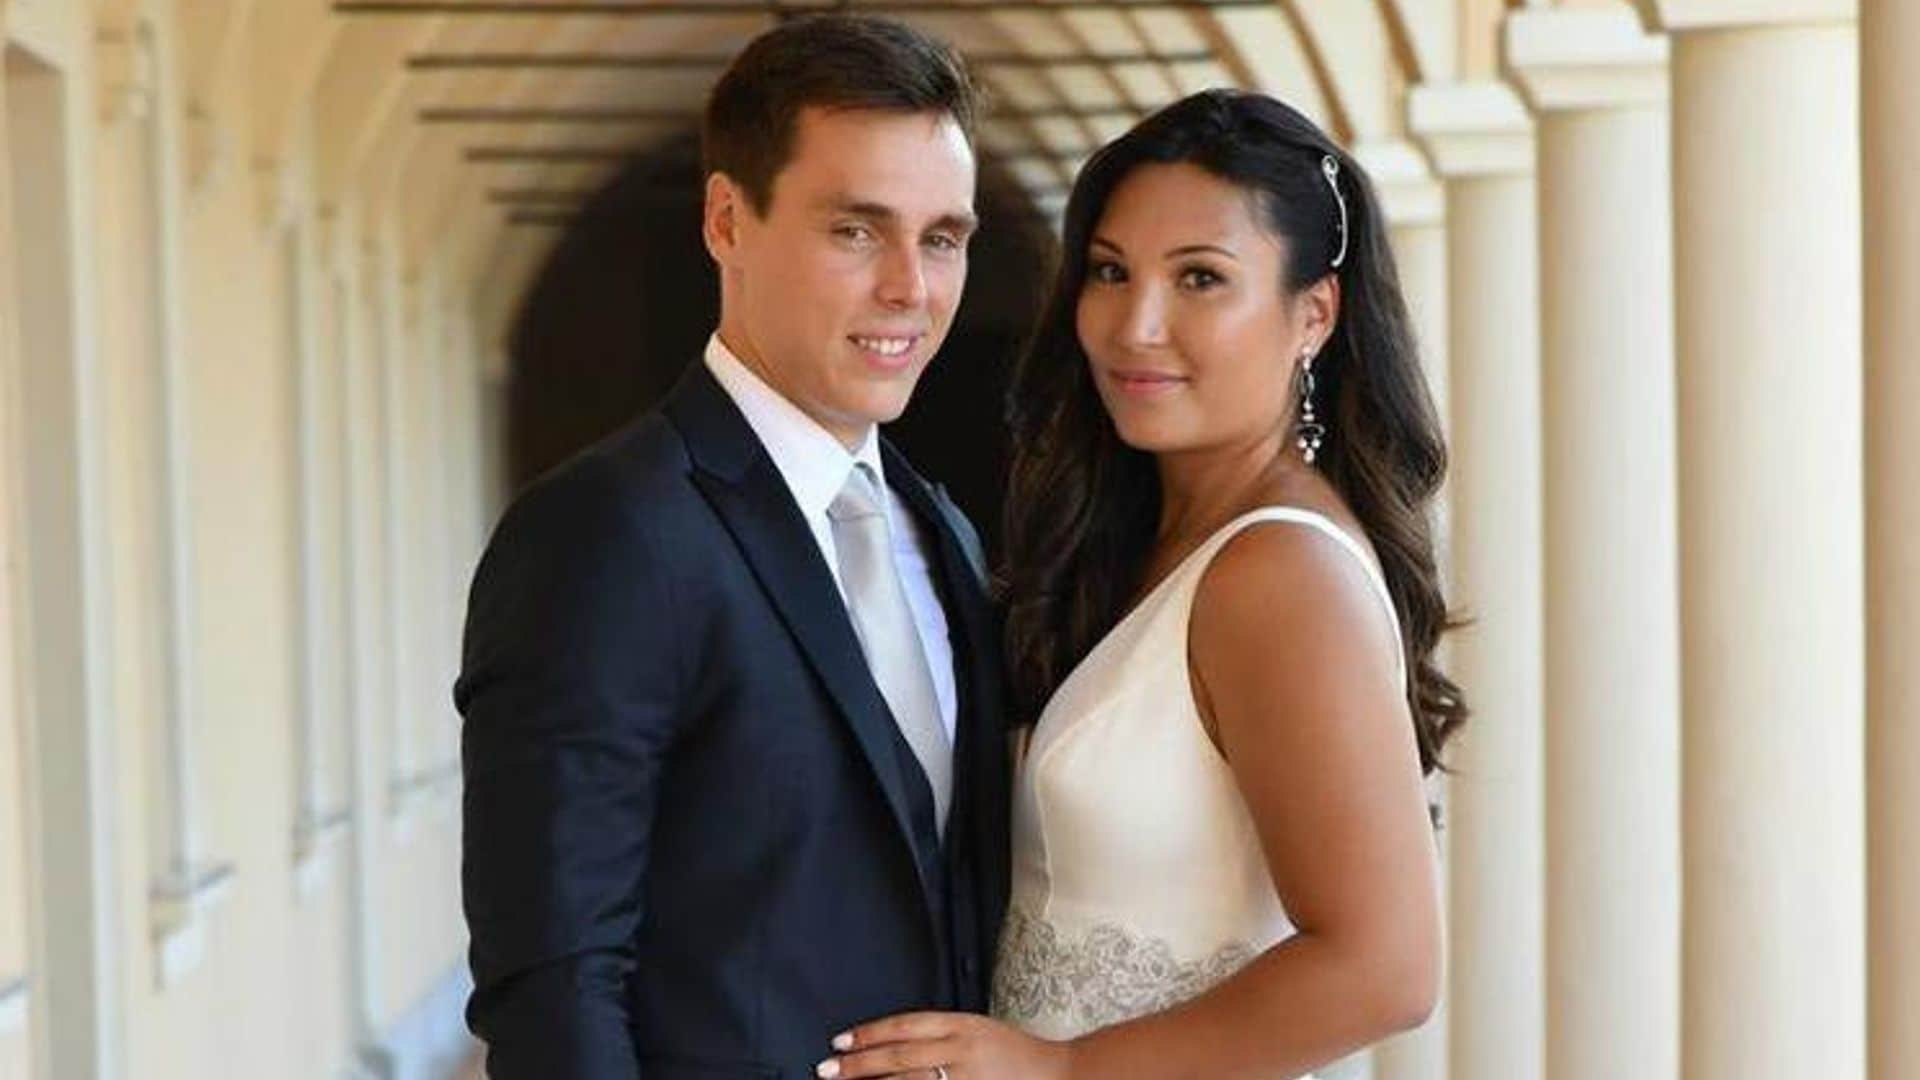 Monaco's Louis Ducruet and Marie Chevallier marry in a royal wedding style unlike any other!